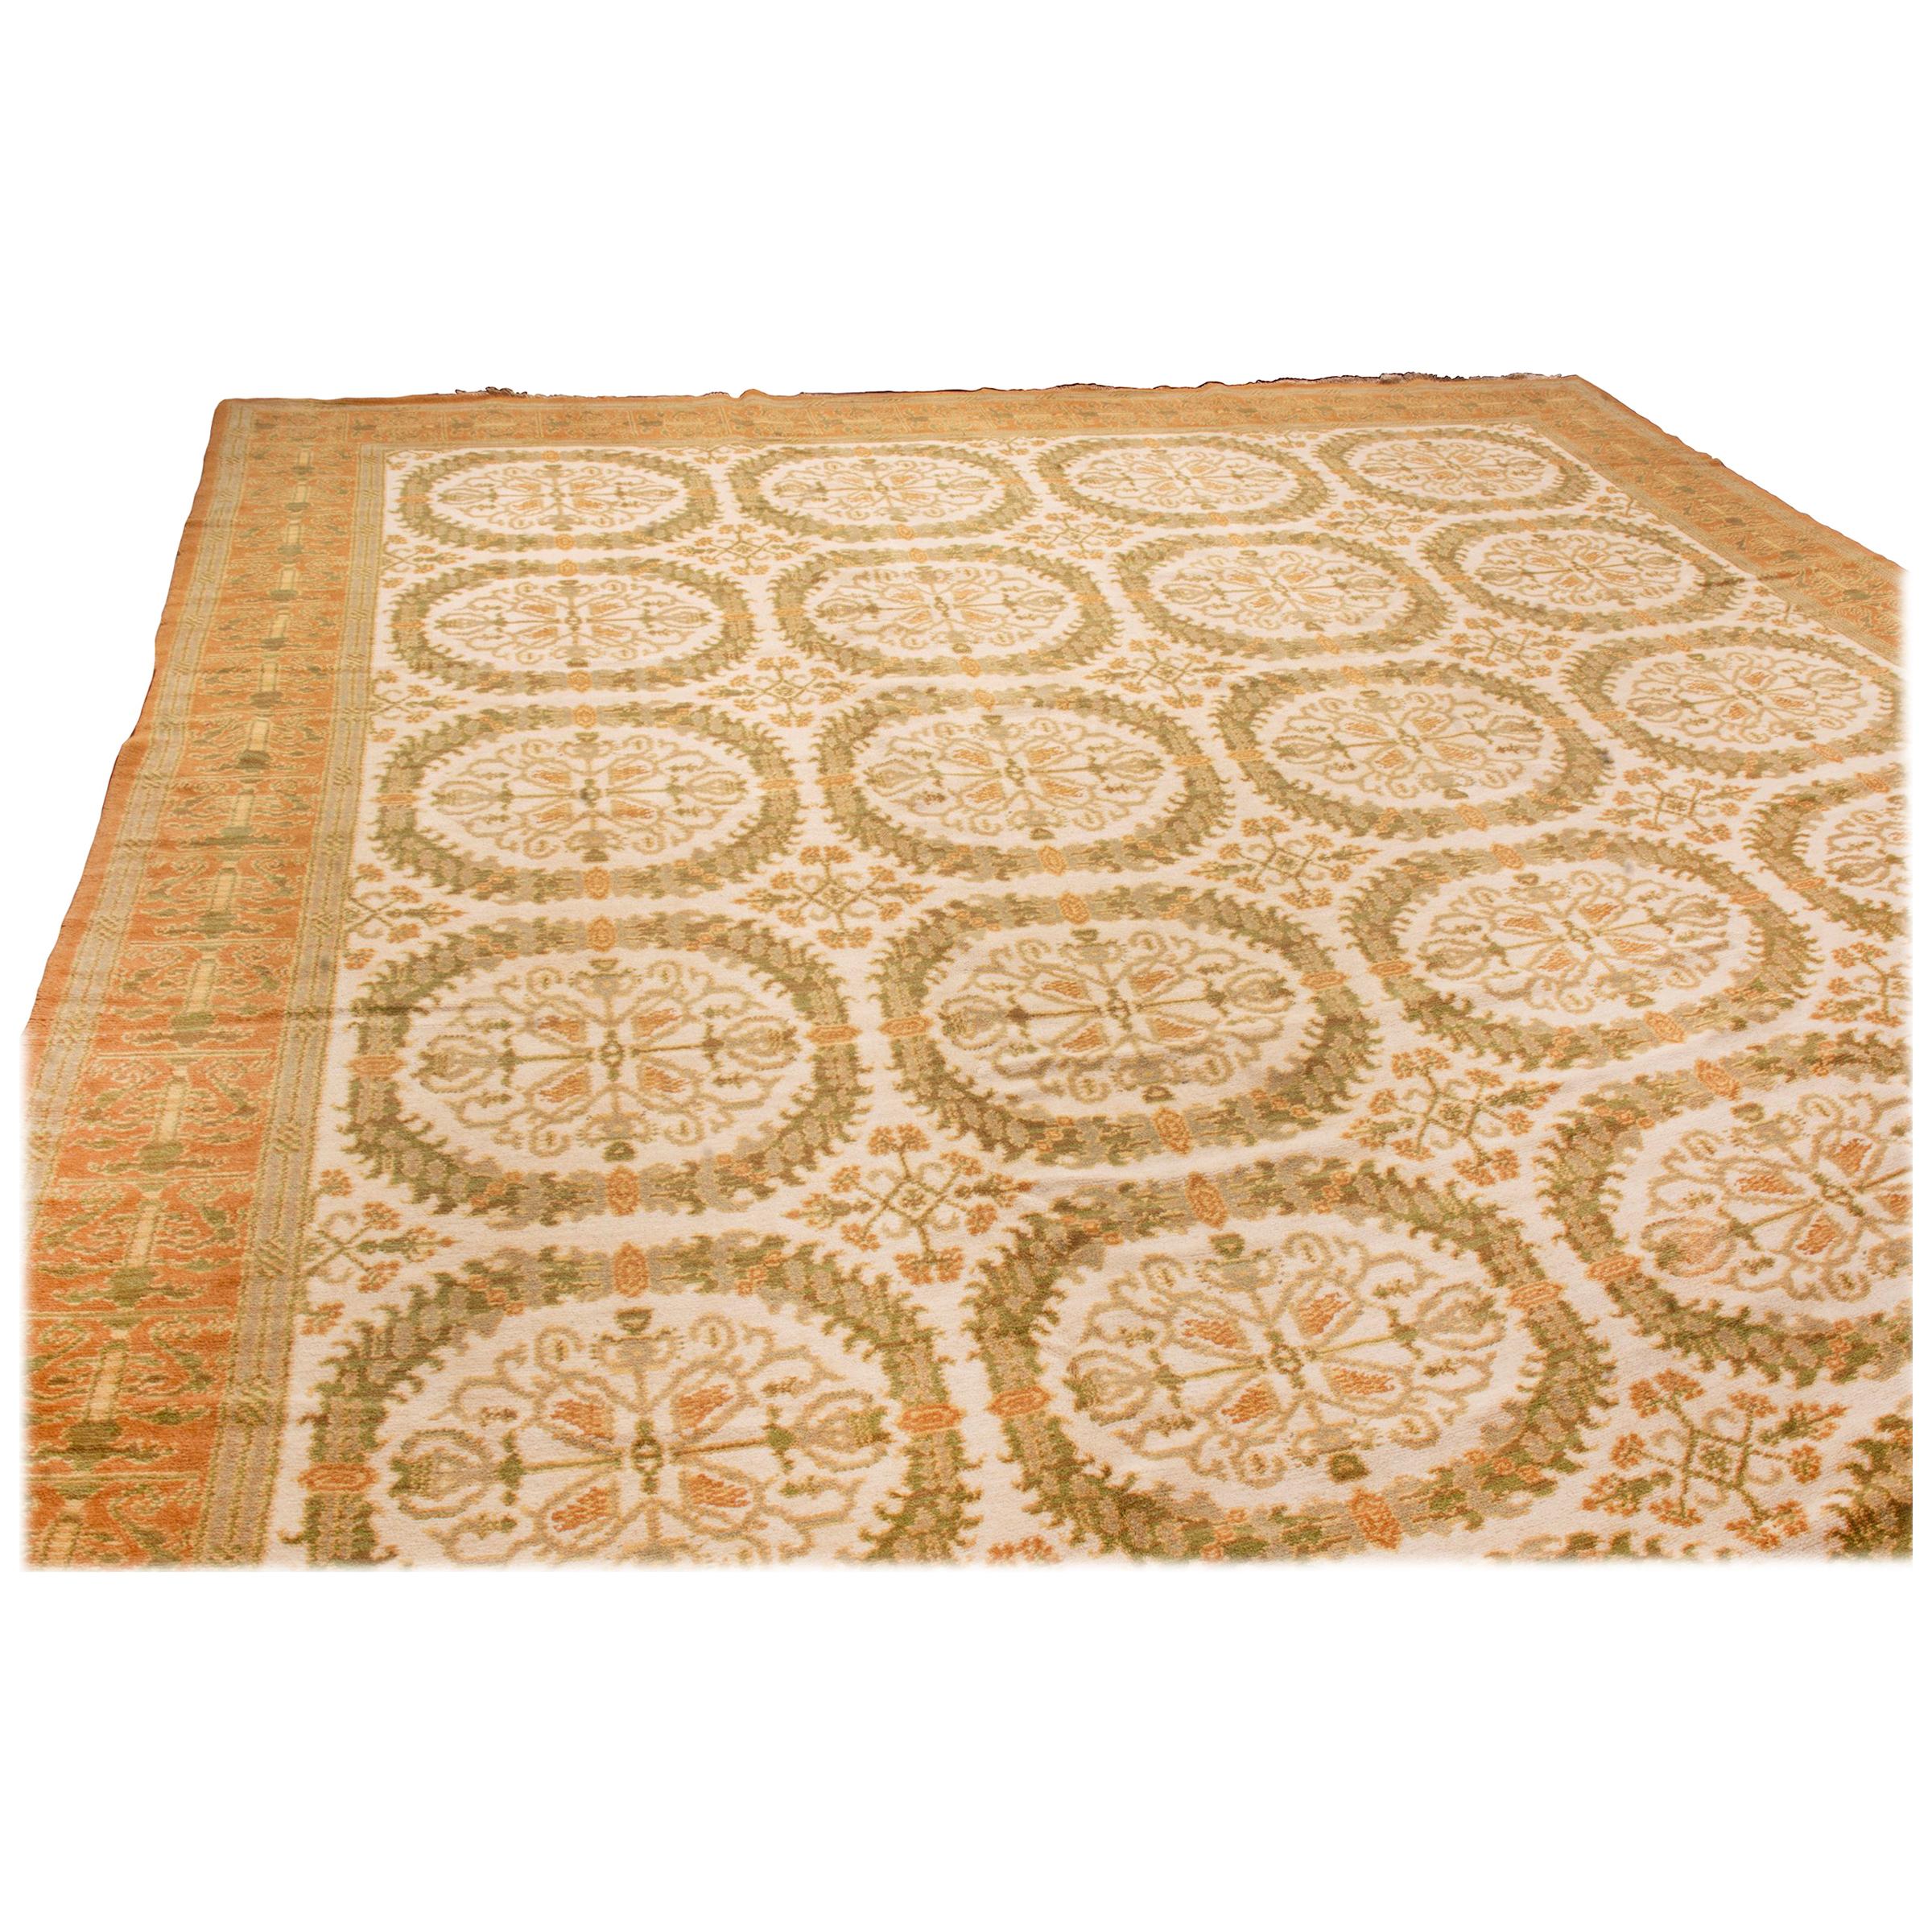 Originating from Spain in 1920, this antique traditional wool rug from Rug & Kilim employs an ornate series of kaleidoscopic floral medallions throughout the beige and greenfield design. Hand knotted in durable wool, the border wraps continuously